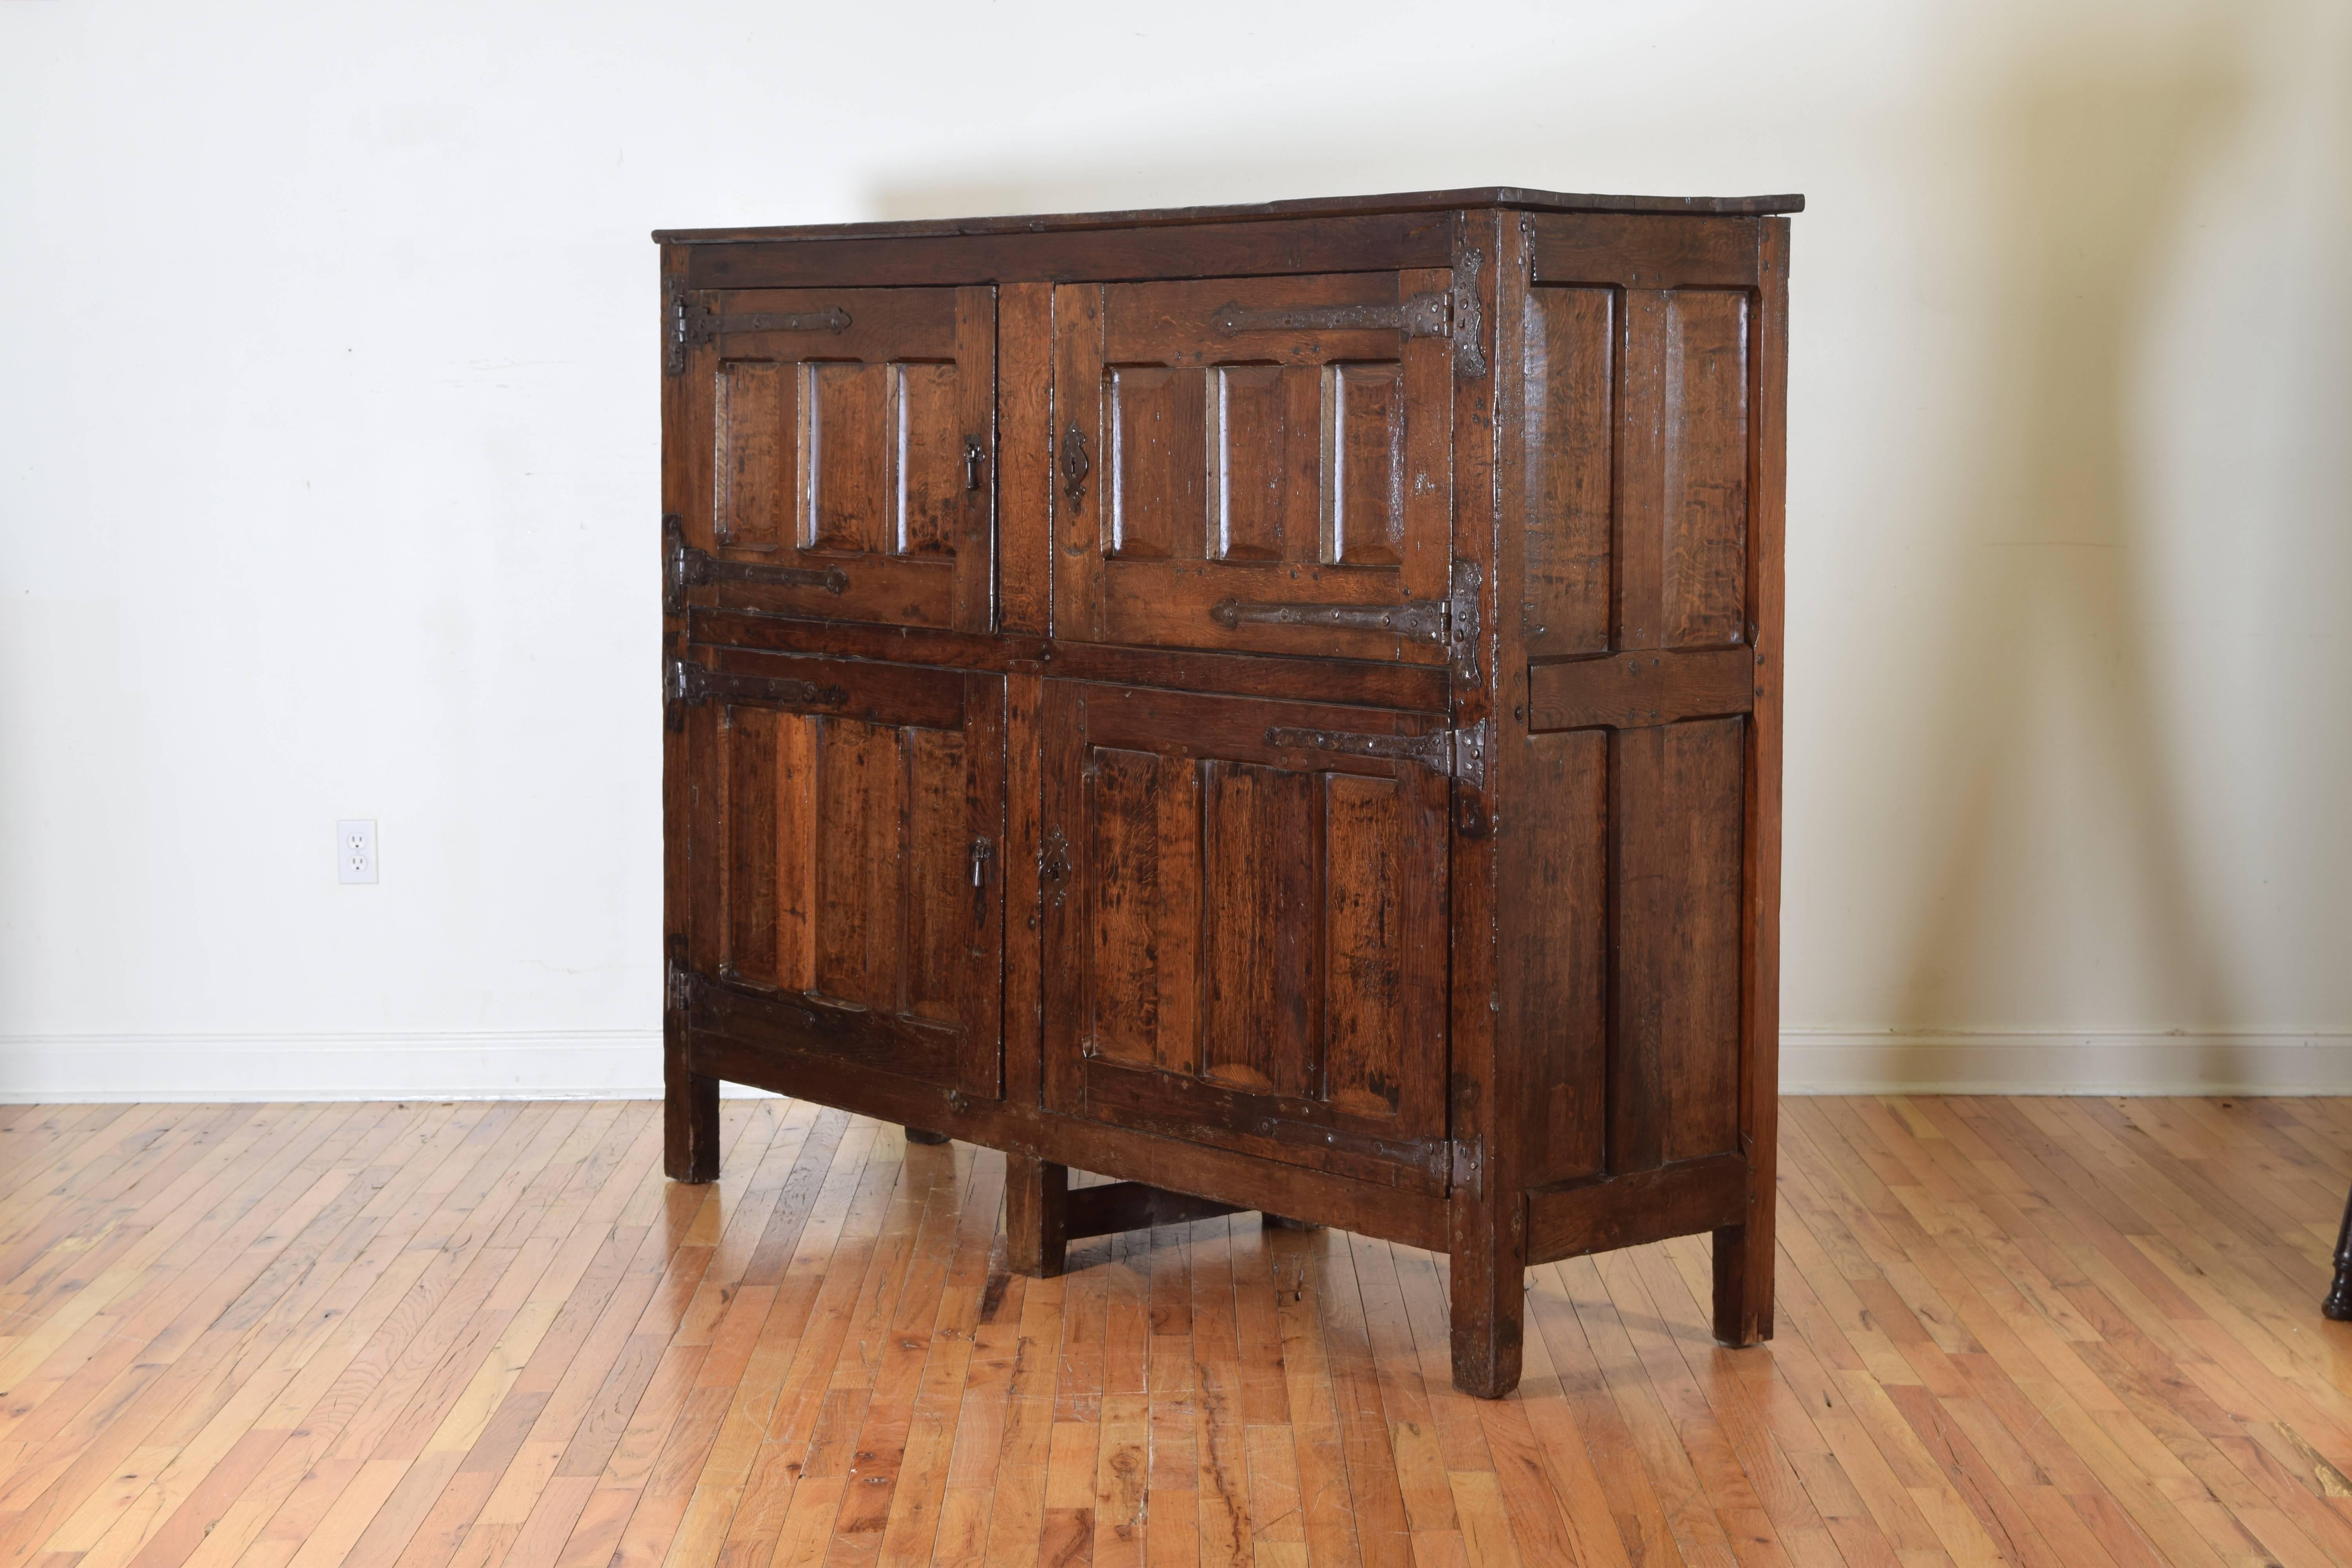 The very solidly built cabinet having two sets of two doors, all paneled, the interiors fitted with recessed shelving, mounted with iron hinges and hardware, working locks.